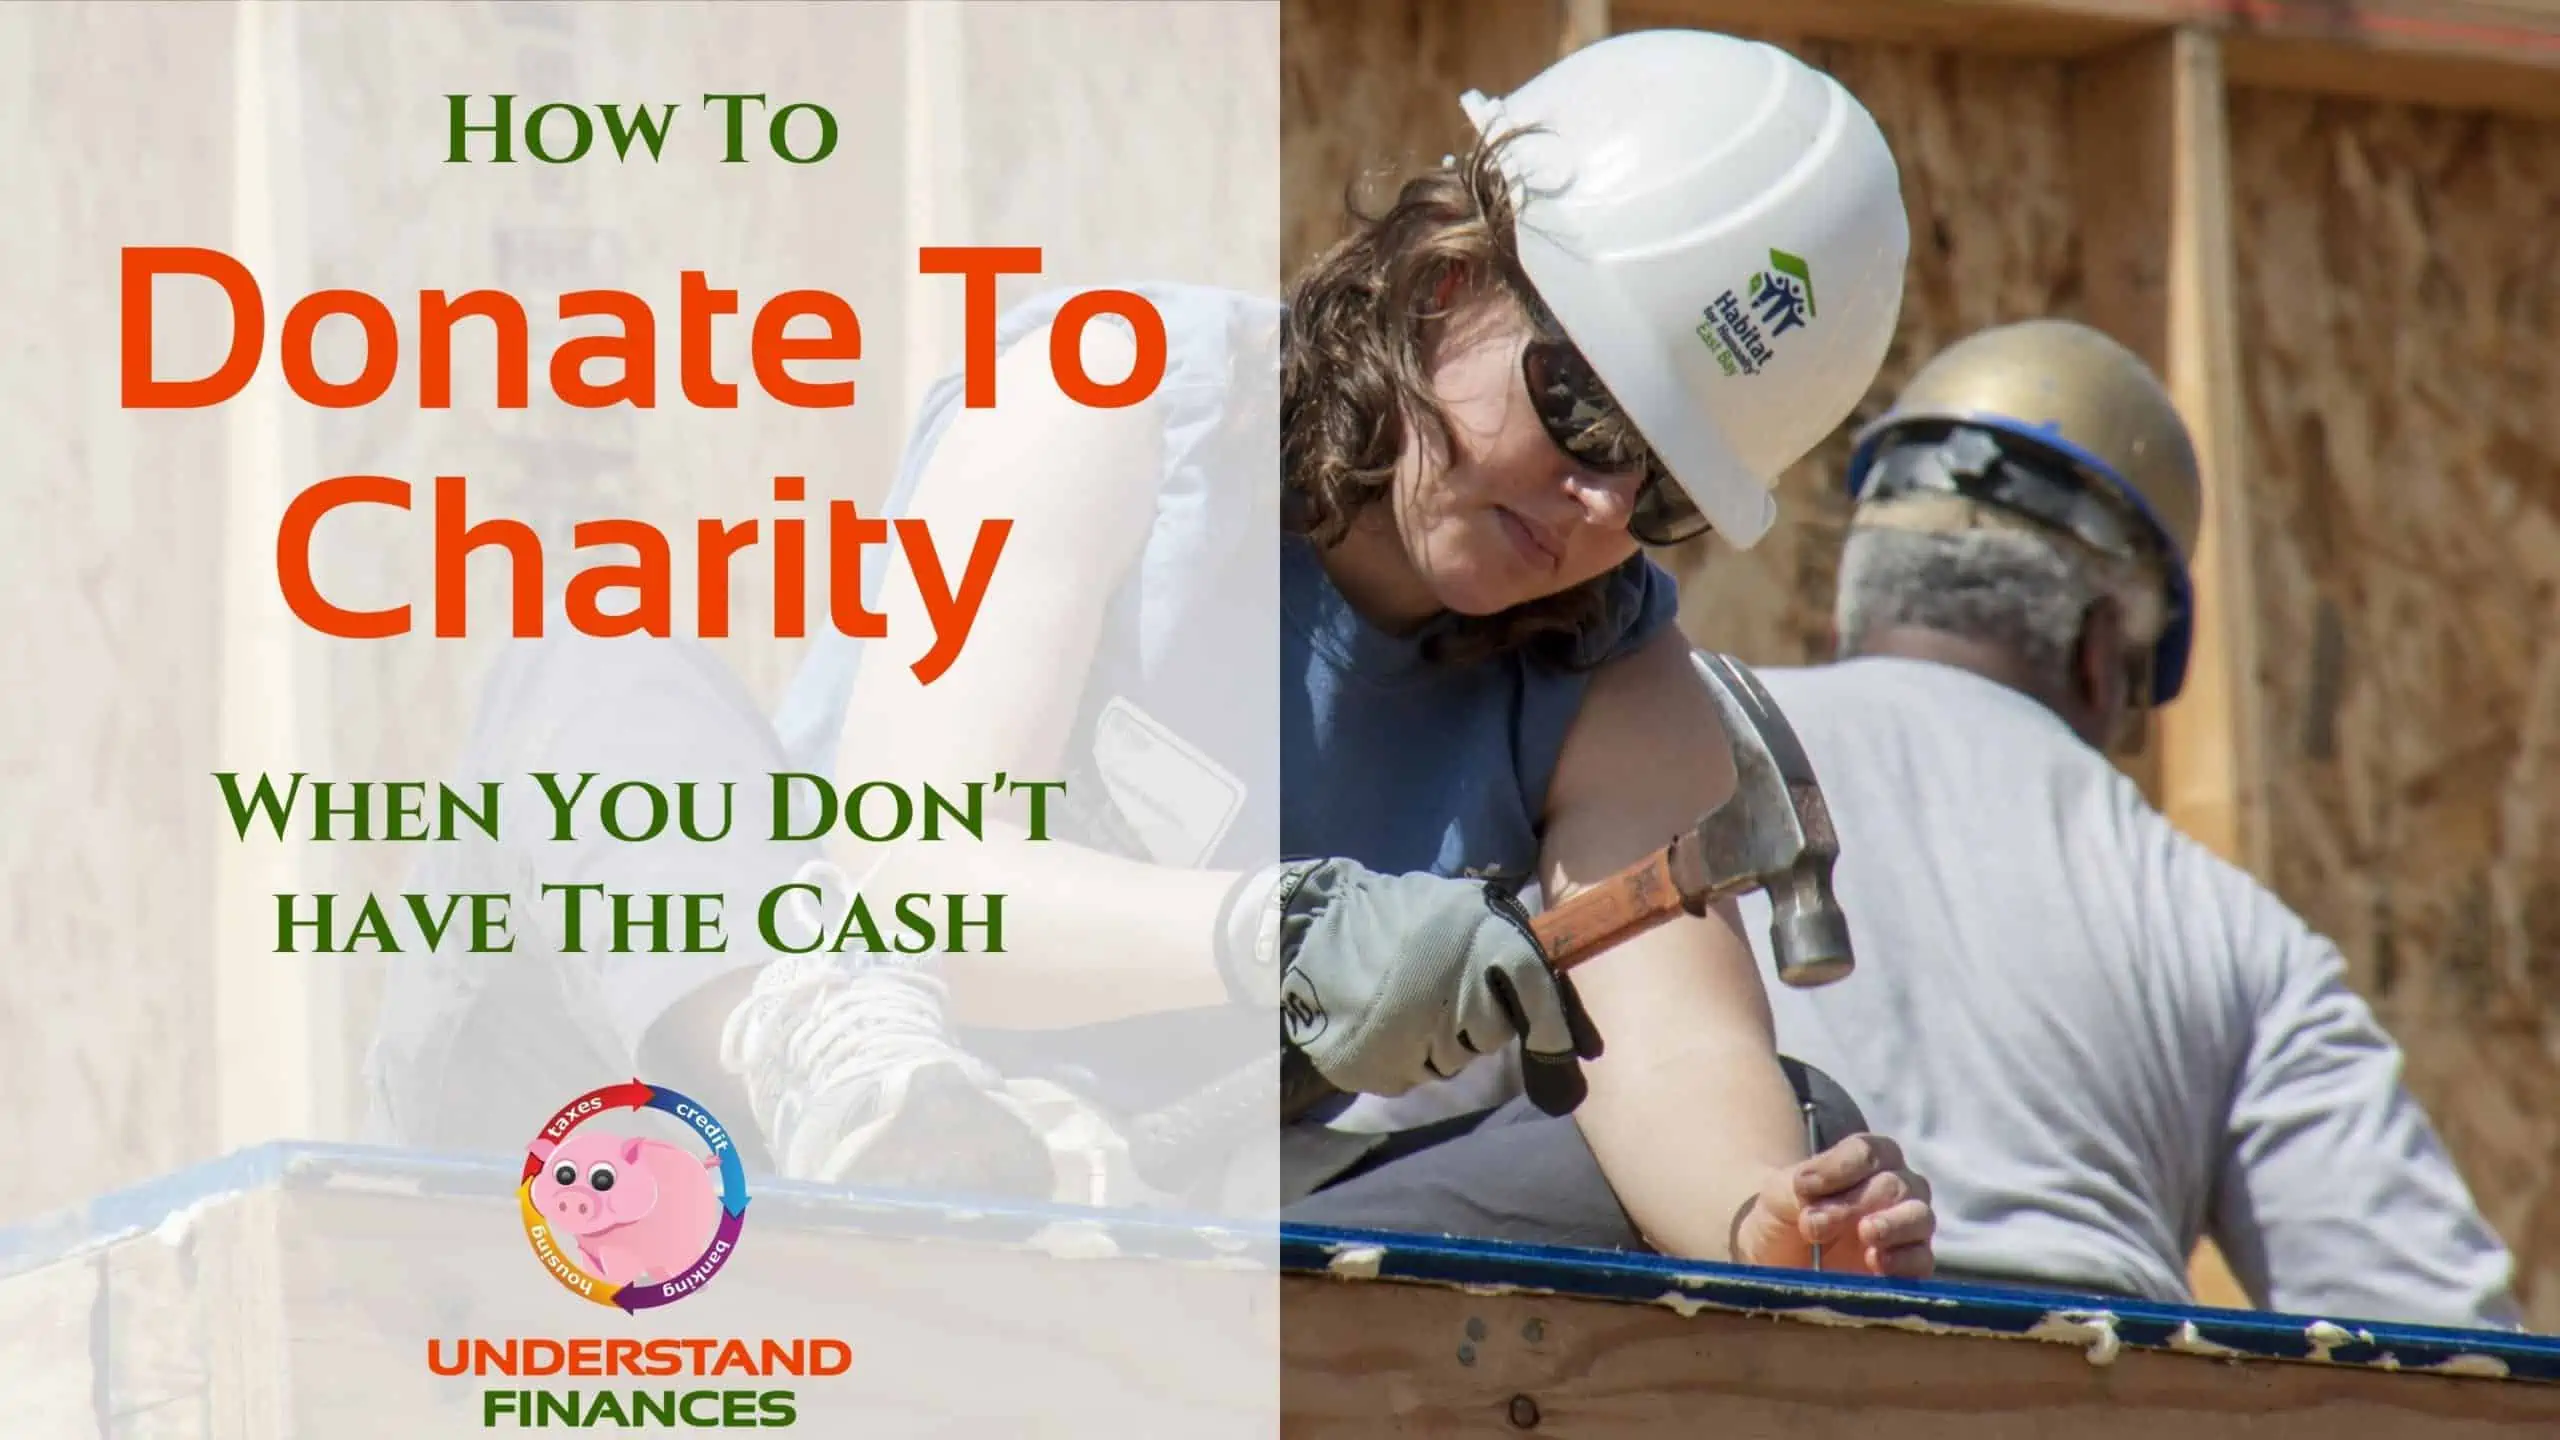 How To Donate To Charity When You Don’t Have The Cash